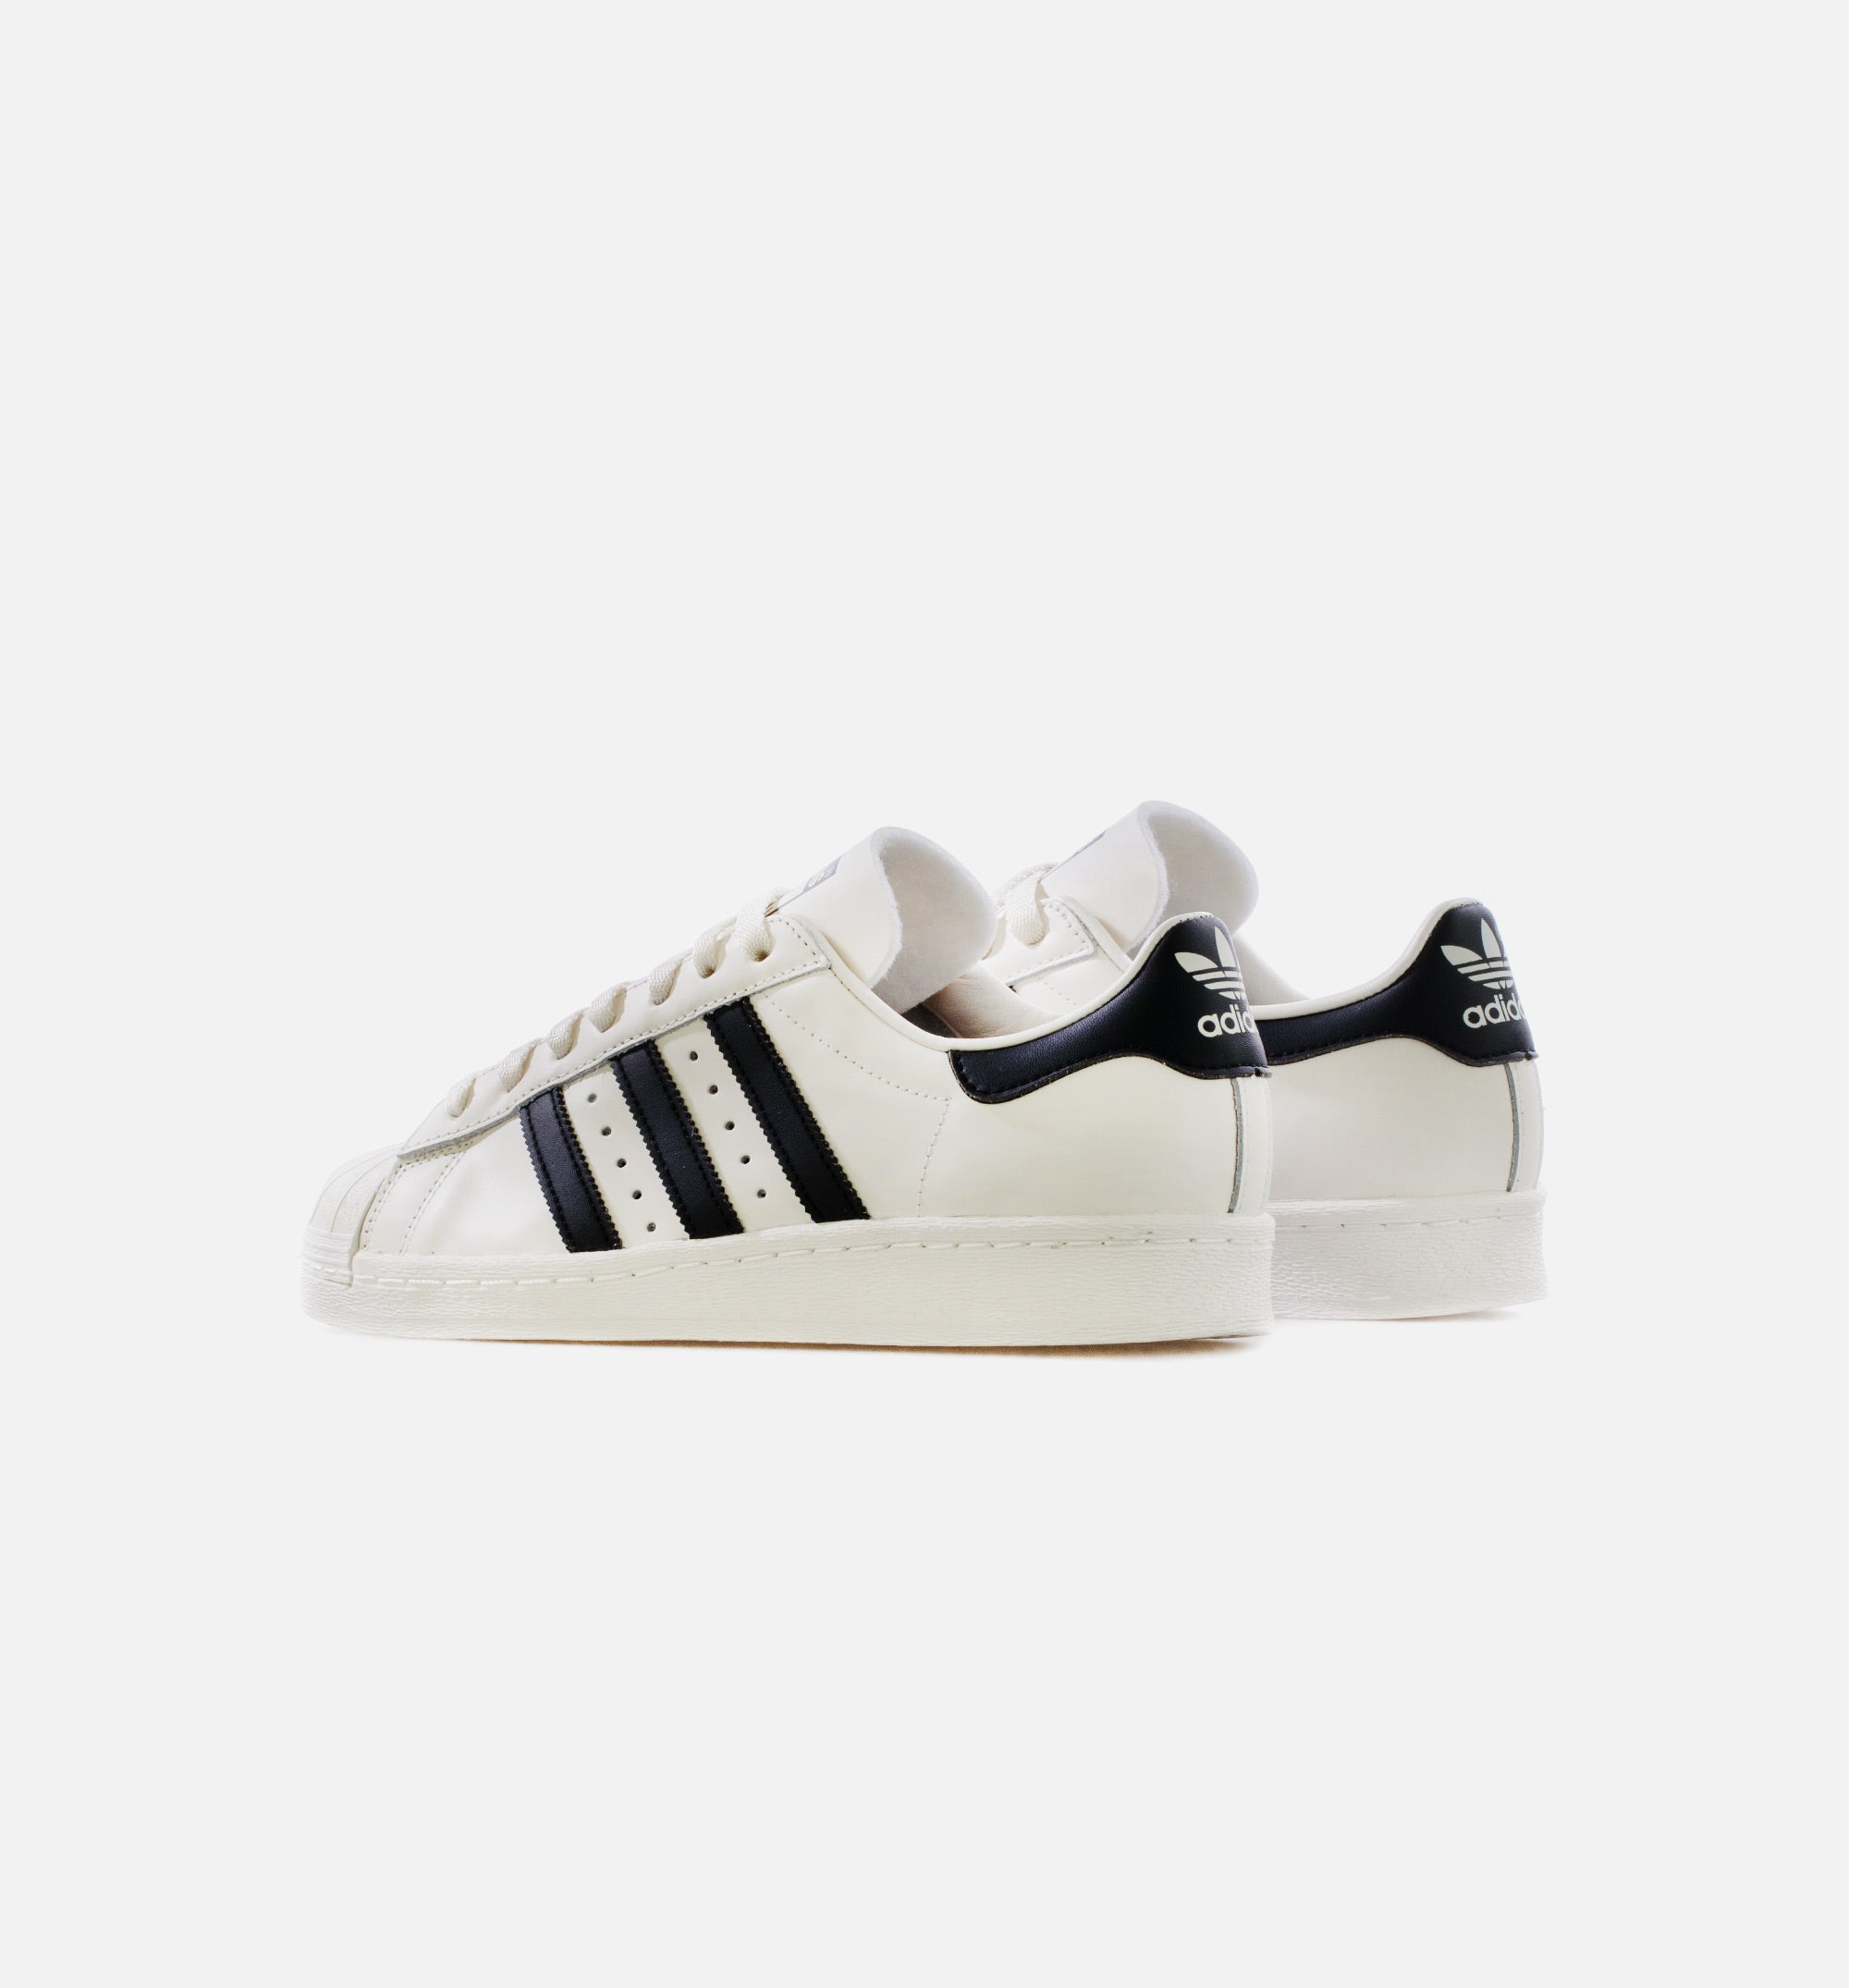 Cloud Mens GY7037 adidas 82 – Superstar - White/Core White Shoe Lifestyle Black/Off